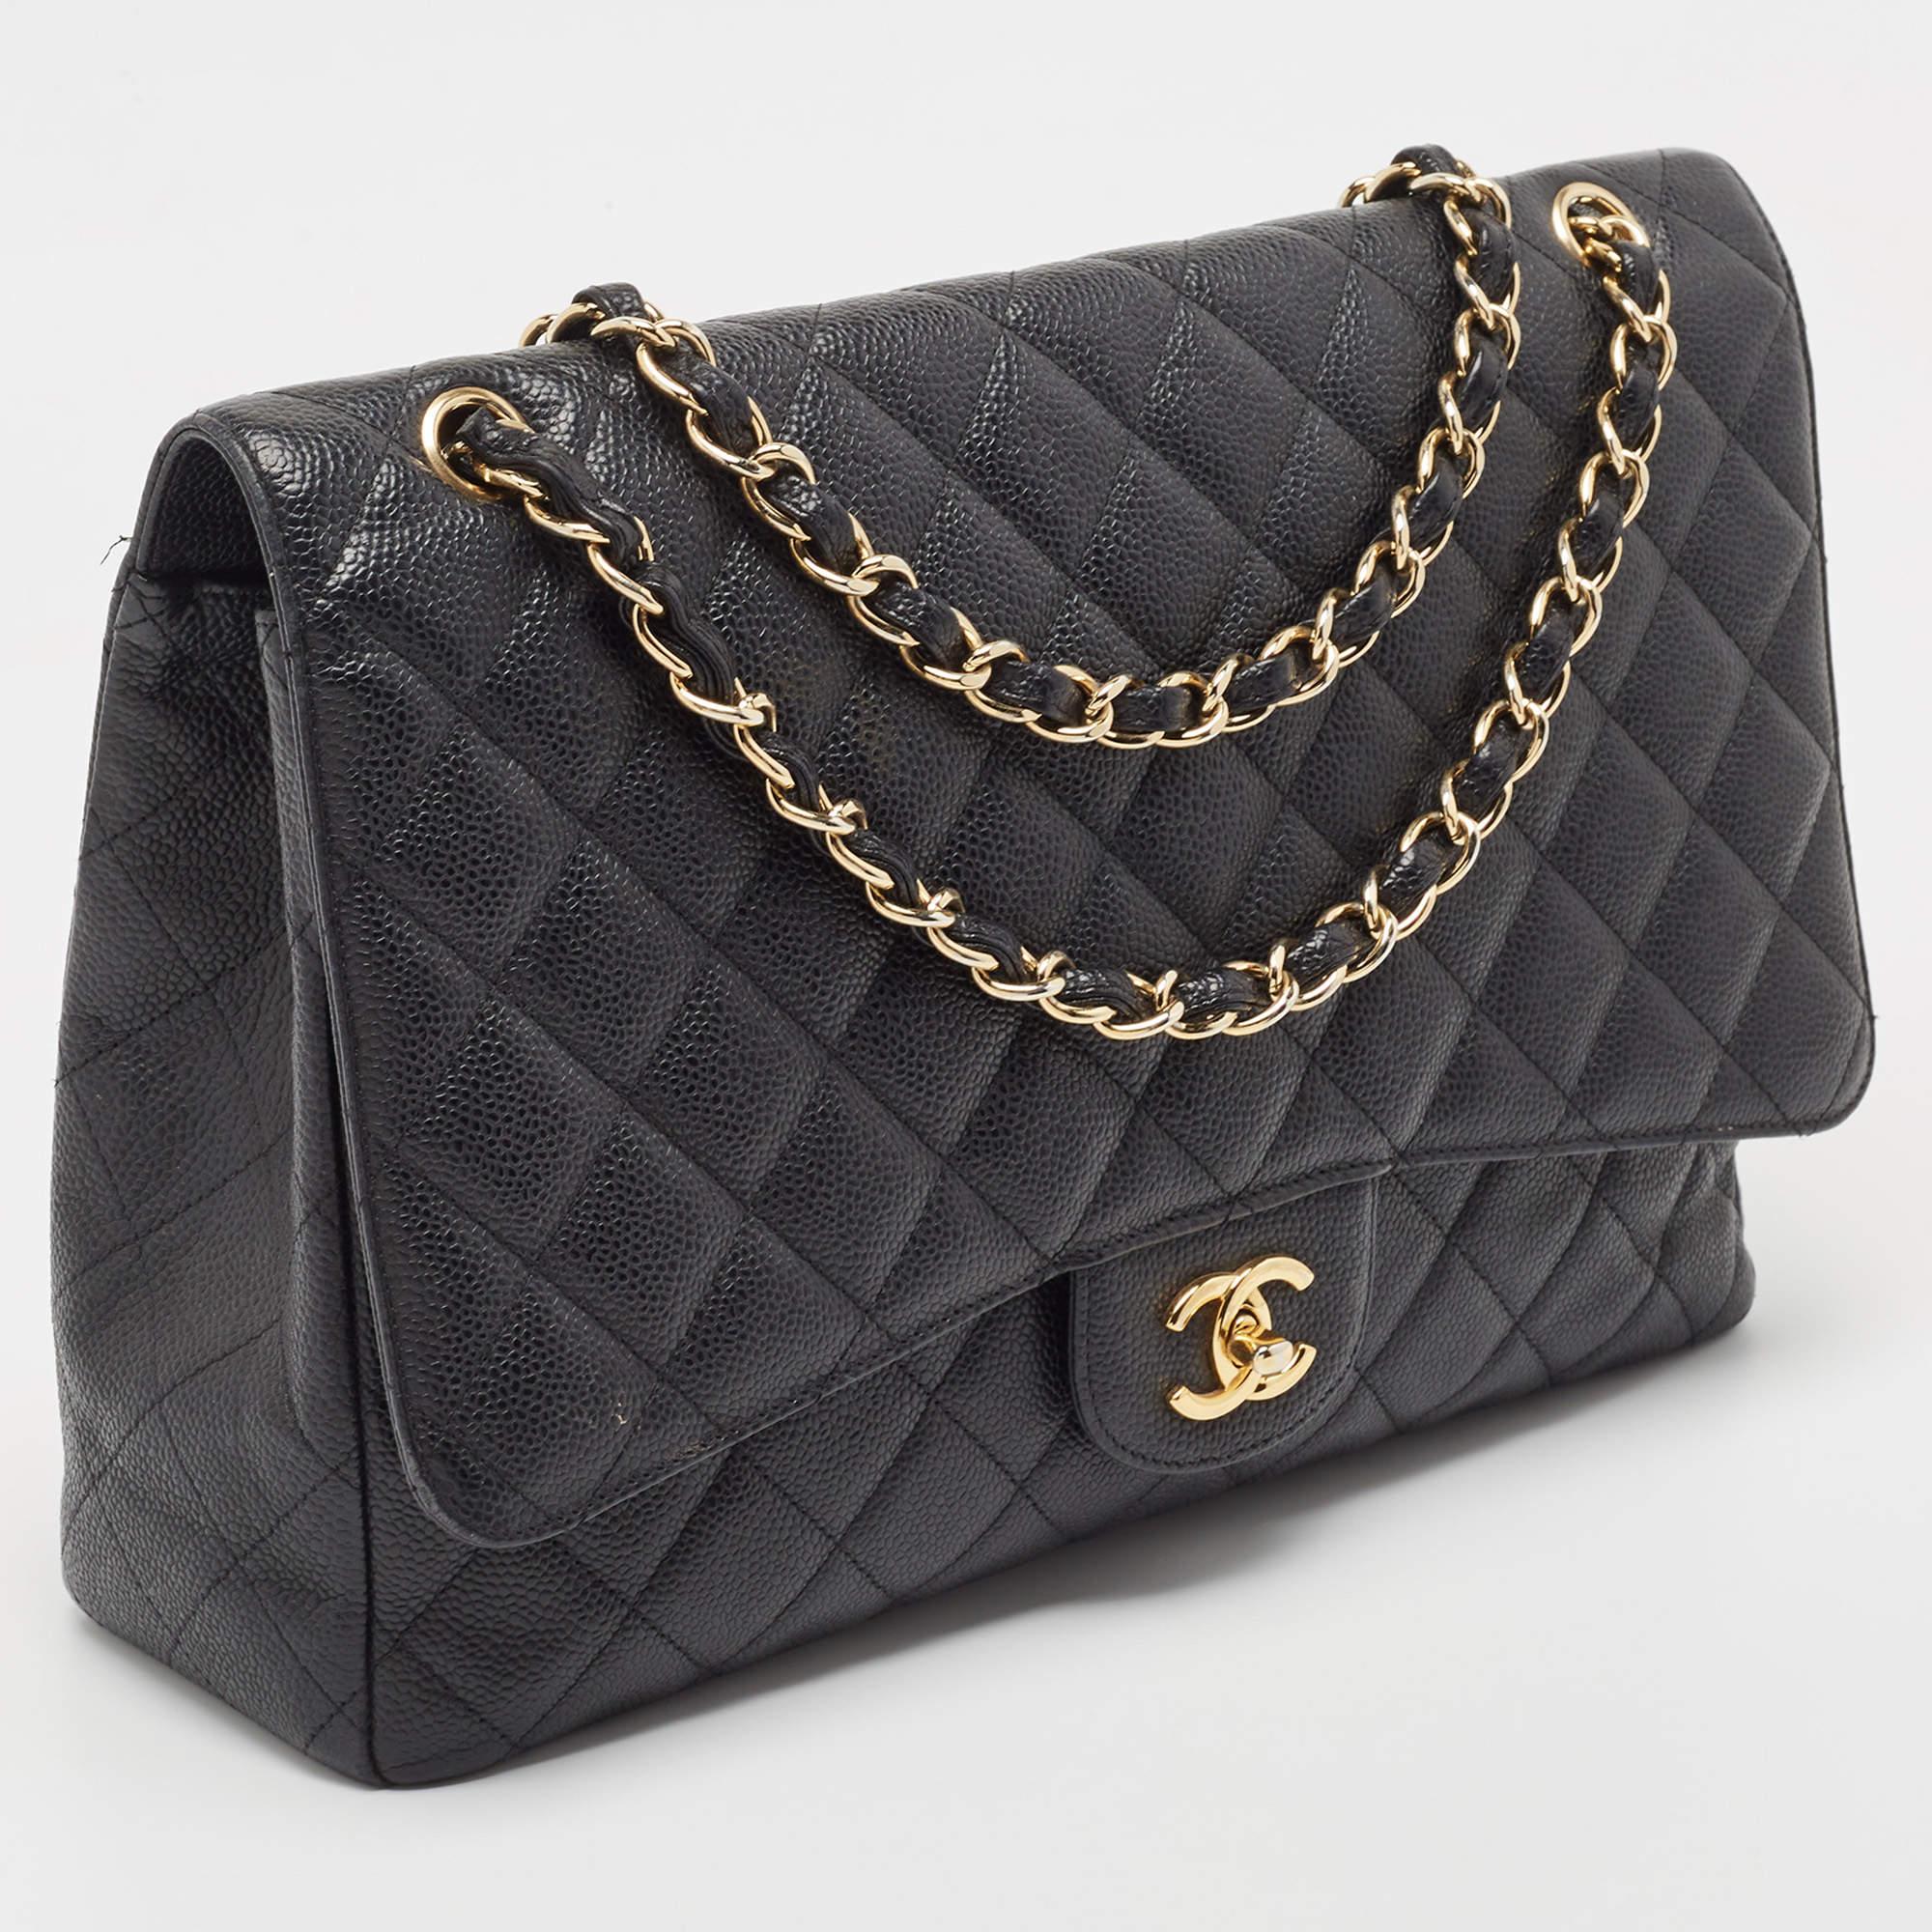 Chanel Black Quilted Caviar Leather Maxi Classic Single Flap Bag For Sale 10